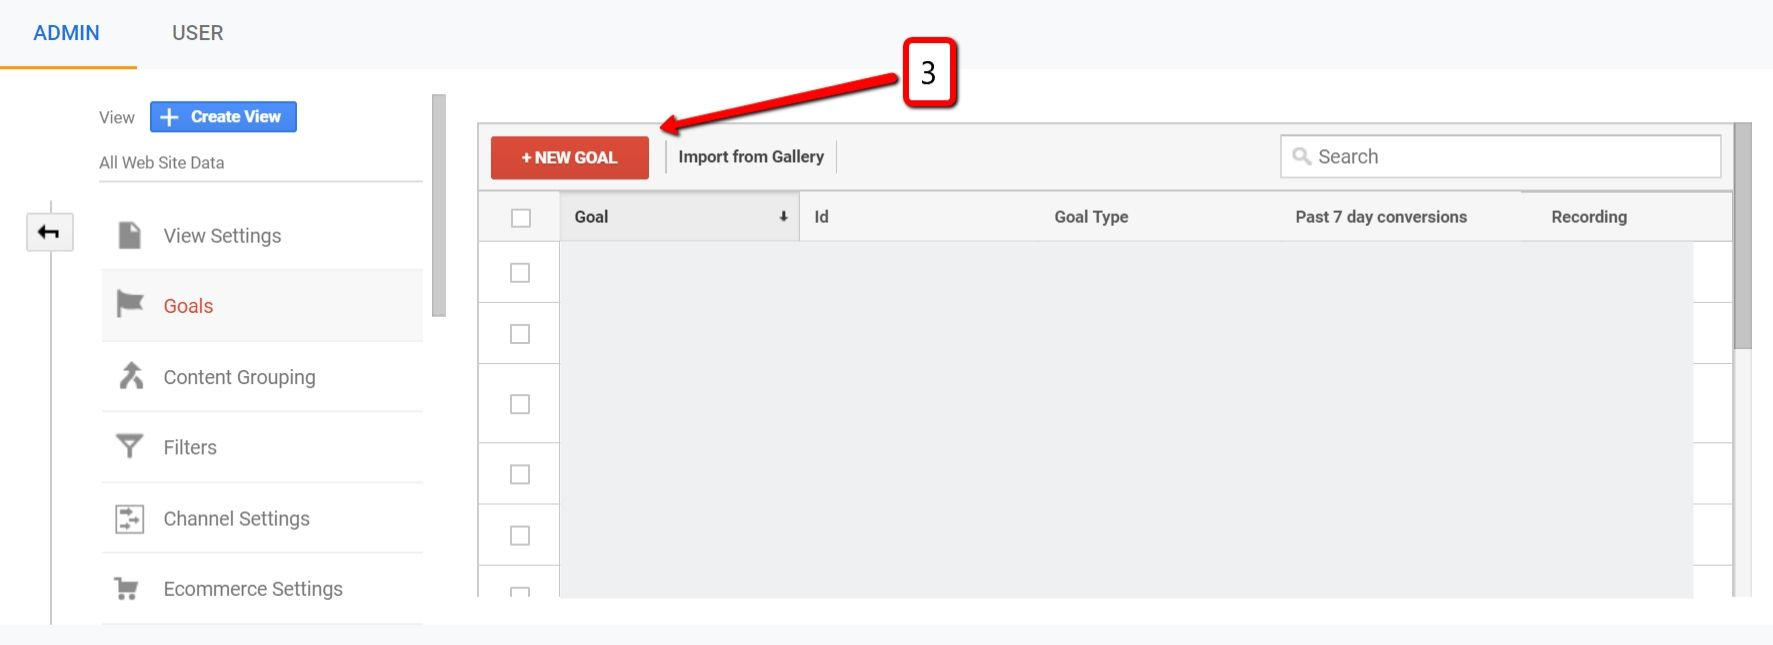 Add a new goal tracking in Google Analytics